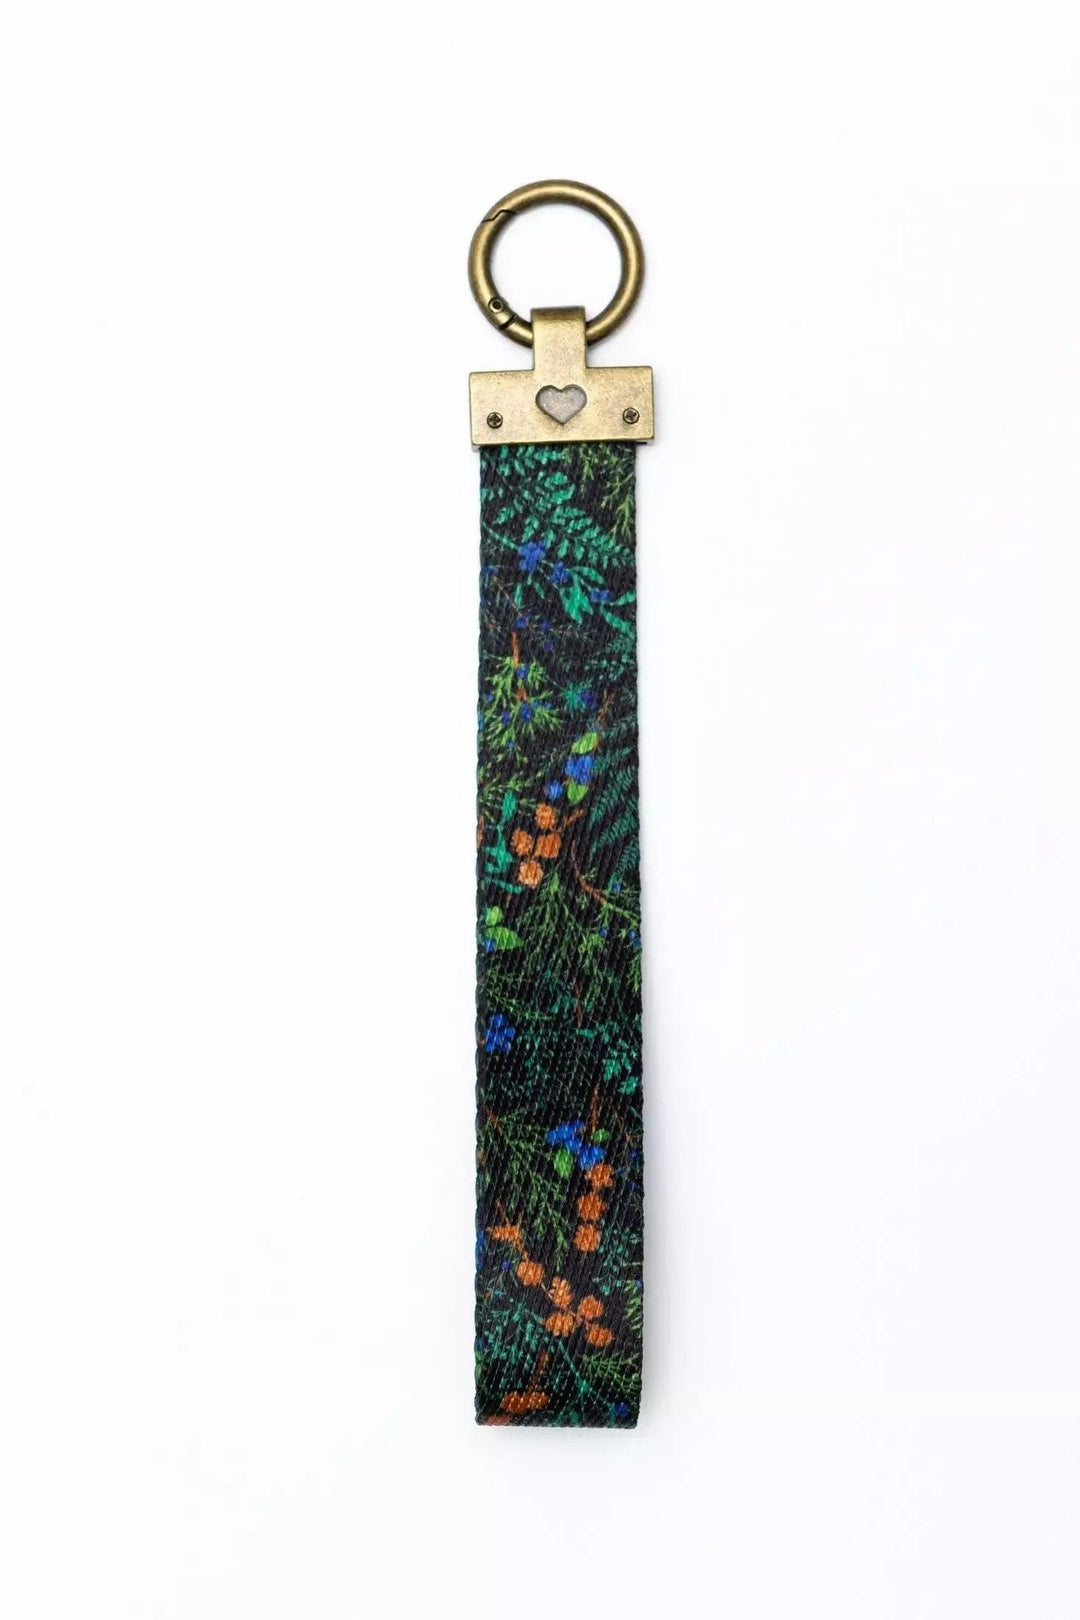 Get the Magical Fern Forest Wristlet Keychain - Aria The Fox – Aria the Fox